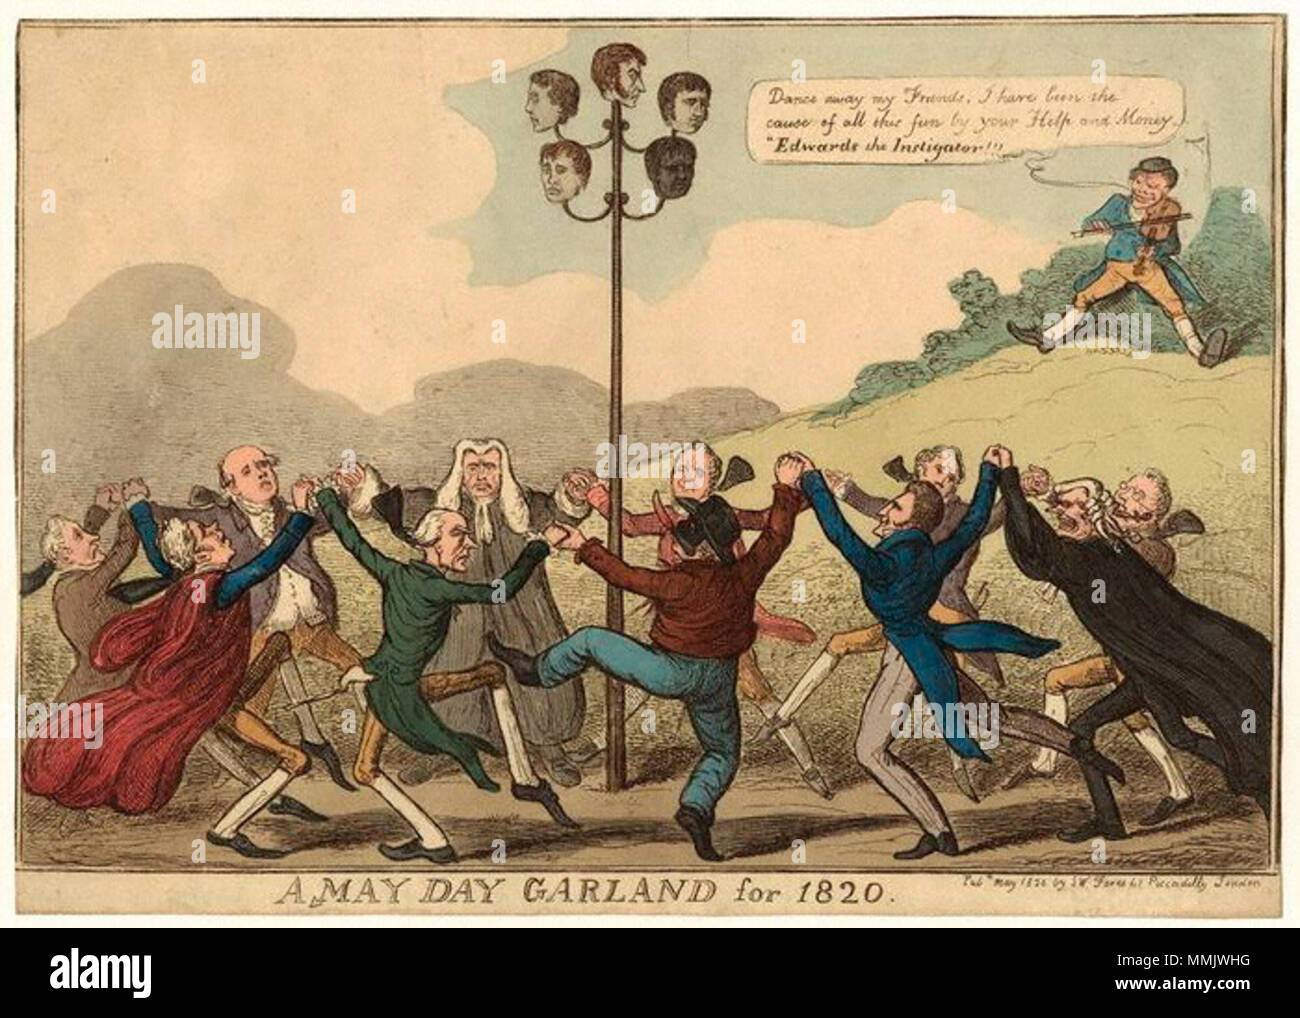 . English: A May Day Garland for 1820 The print includes representations of Nicholas Vansittart, 1st Baron Bexley (1766-1851); John Thomas Brunt (1782-1820) (executed conspirator); George Canning (1770-1827); William Davidson (1786-1820) (executed conspirator); George Edwards (1787-1843) (spy and agent provocateur who uncovered the Cato Street Conspiracy); Robert Gifford, 1st Baron Gifford (1779-1826); James Ings (1794-1820) (executed conspirator); Robert Stewart, 2nd Marquess of Londonderry; Henry Addington, 1st Viscount Sidmouth (1757-1844); Charles Abbott, 1st Baron Tenterden (1762-1832); A Stock Photo